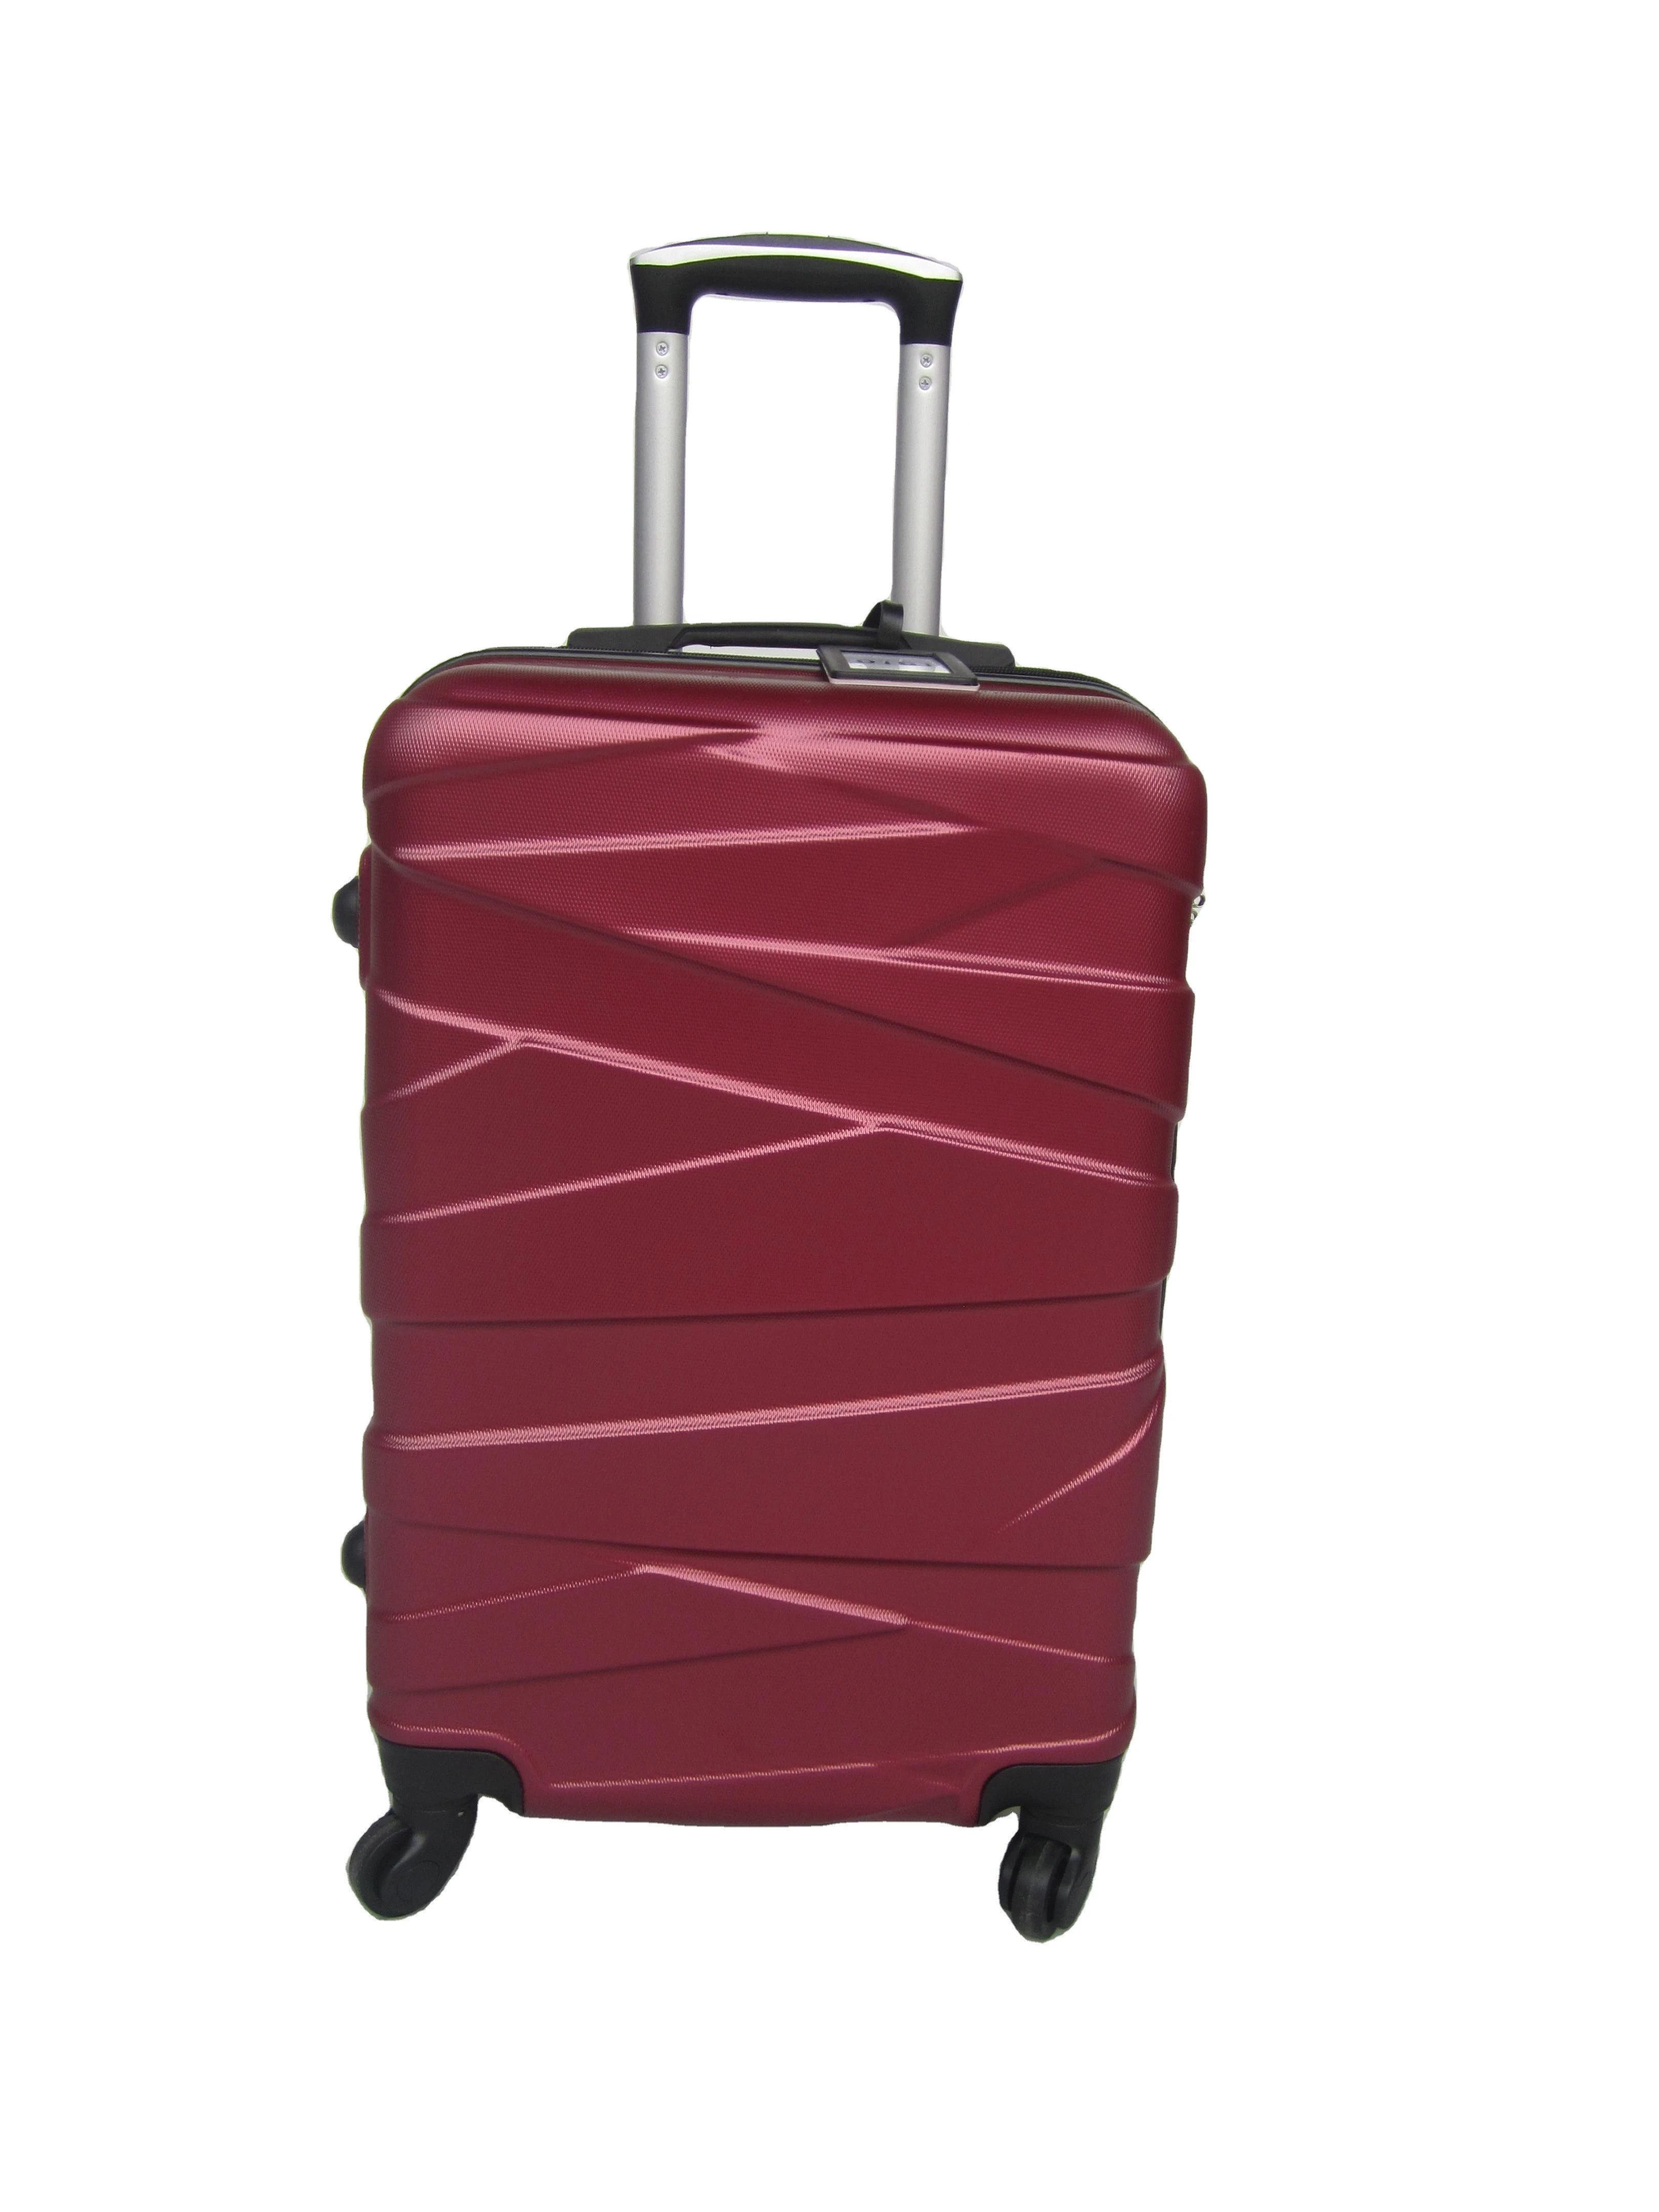 SKD 12PCS LUGGAGE 2 WHEELS NEW ARRIVAL CHEAP PRICE LUGGAGE SET SEMI FINISH ABS TROLLEY LUGGAGE